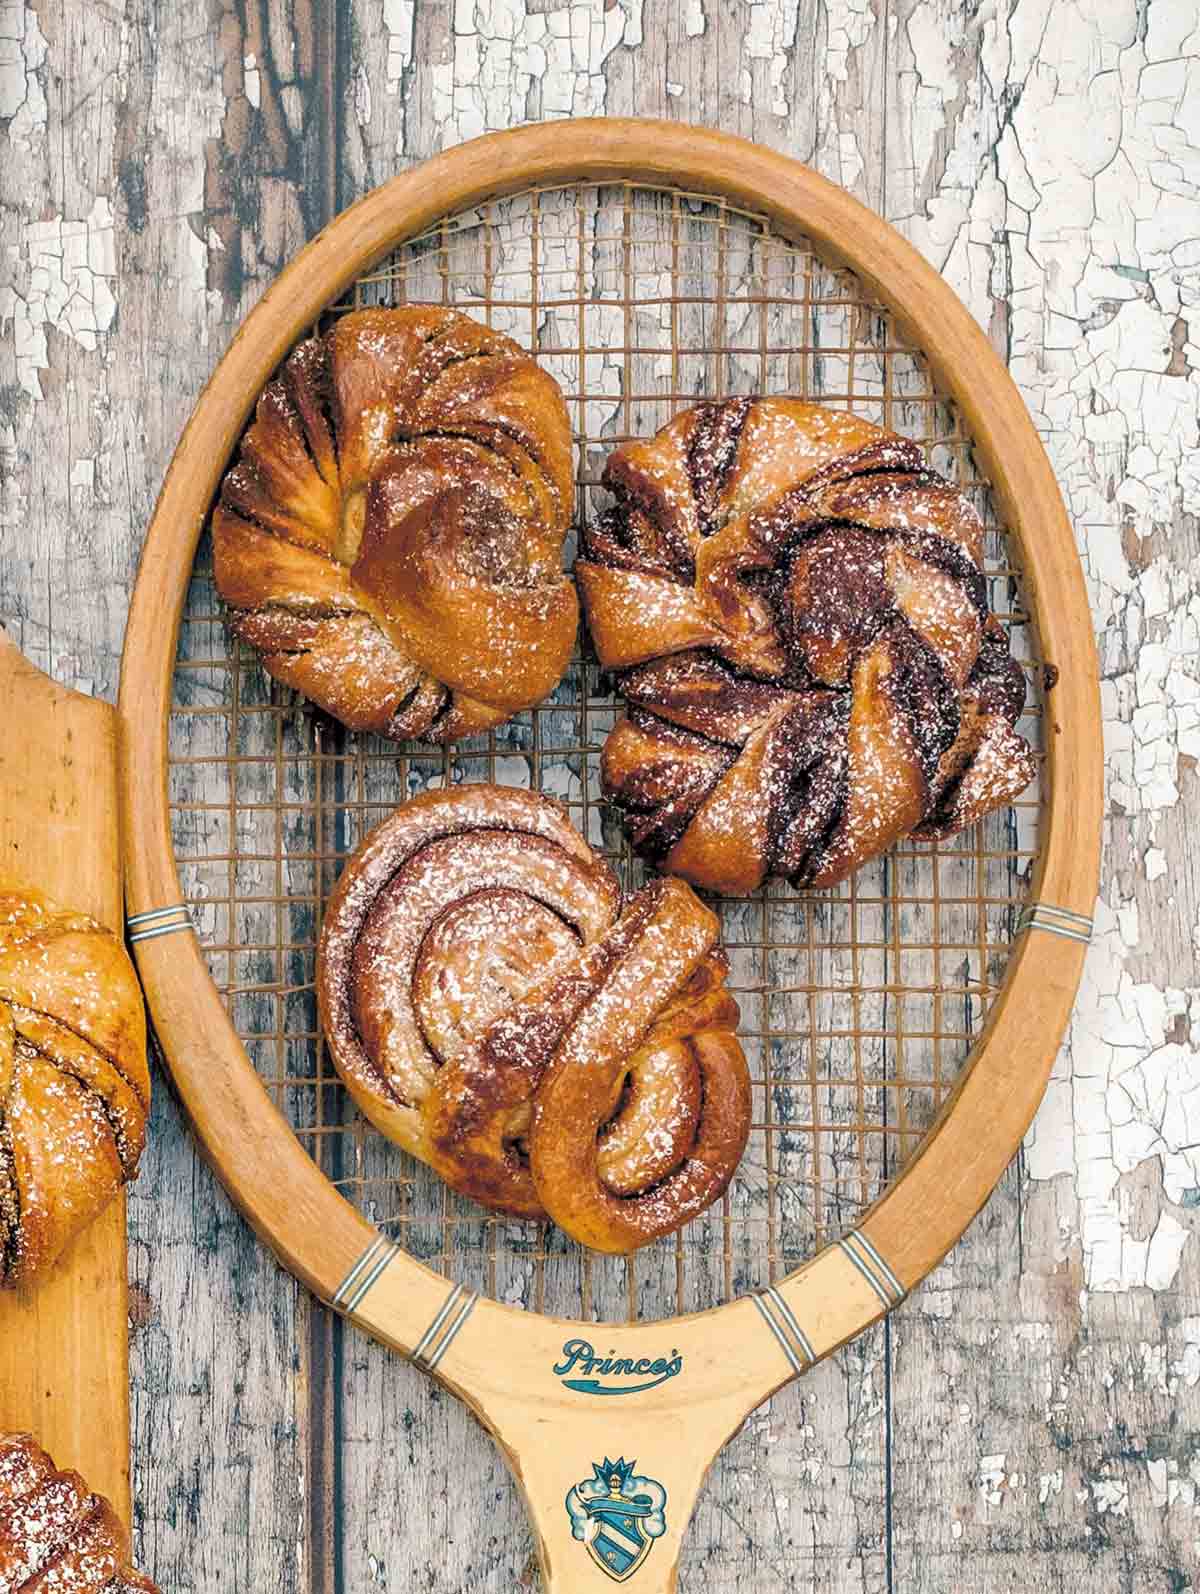 Three Swedish cardamom buns with different fillings laying on an old-fashioned tennis racket.